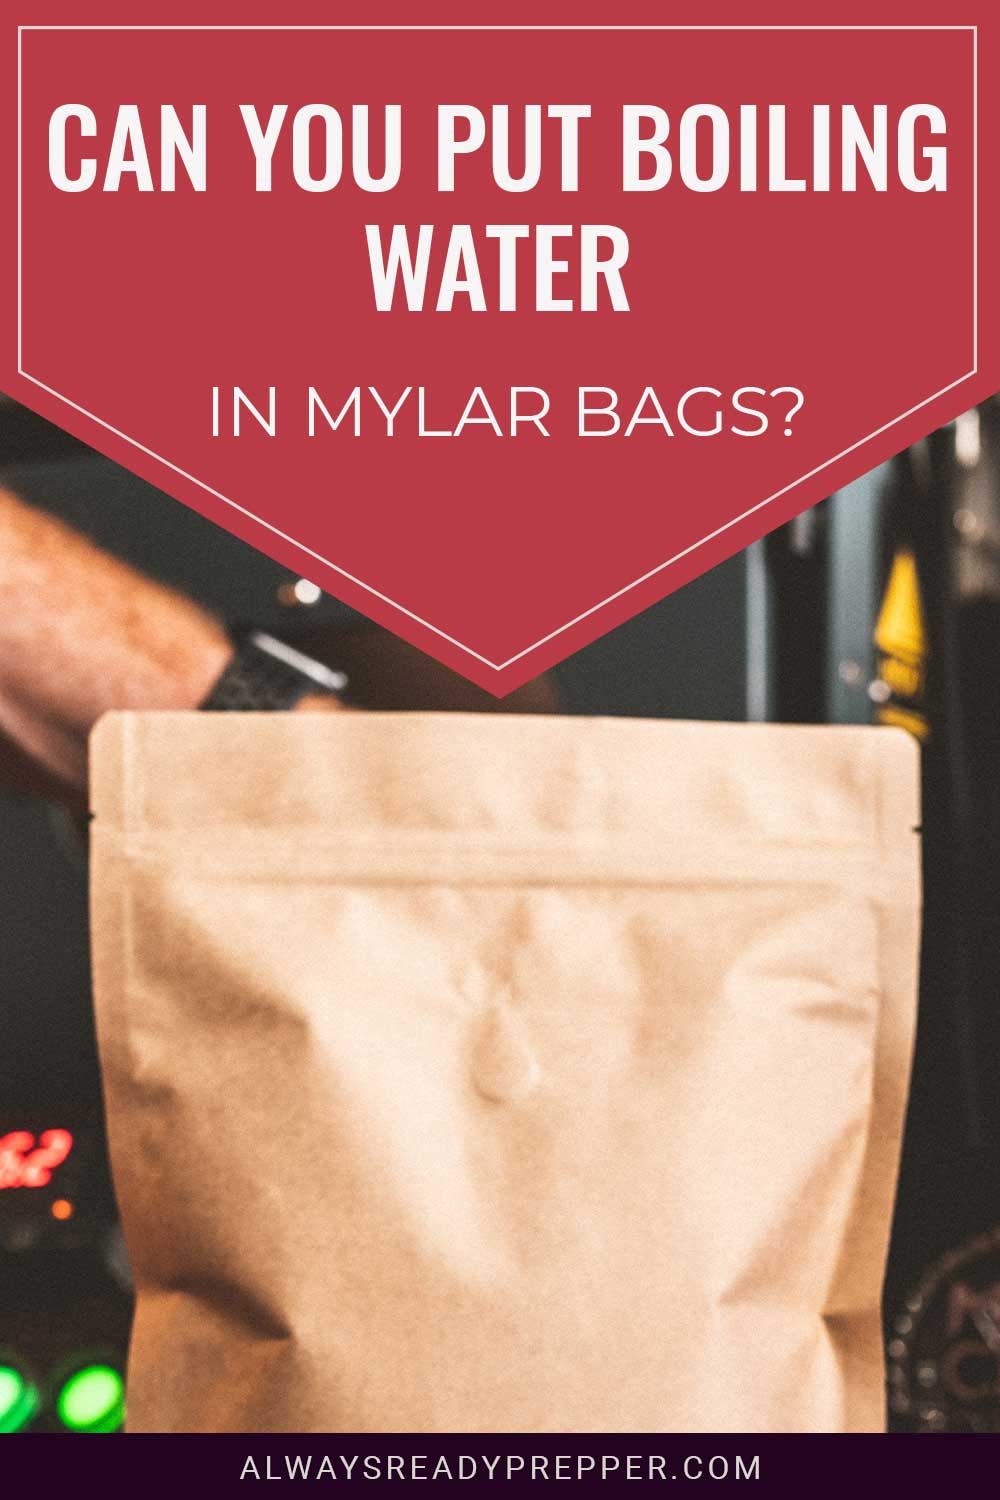 A brown mylar bag - Can You Put Boiling Water In it?